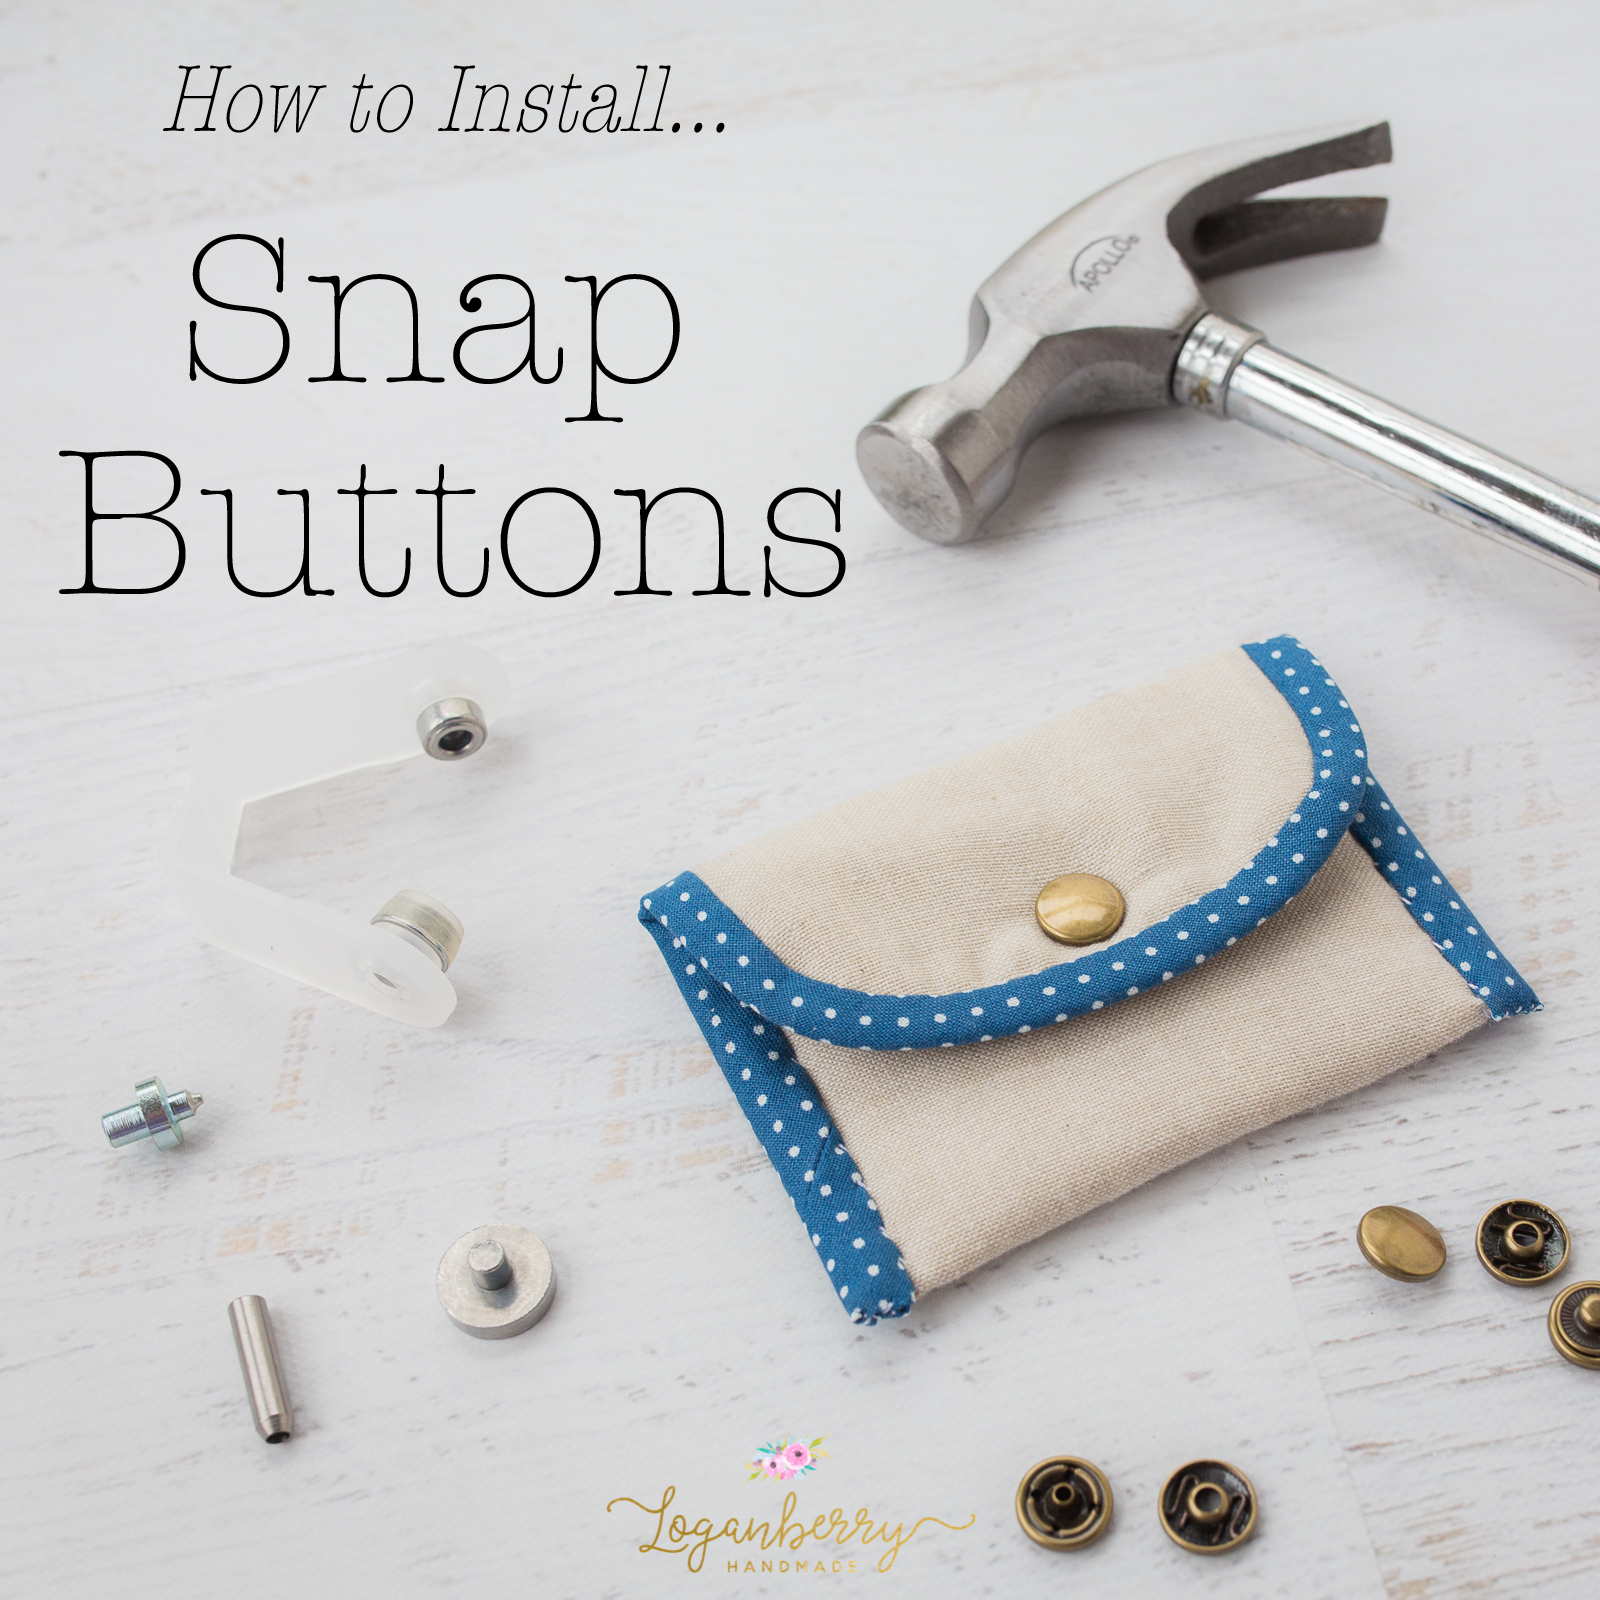 How to Use the Snap Fastener Installation Tool